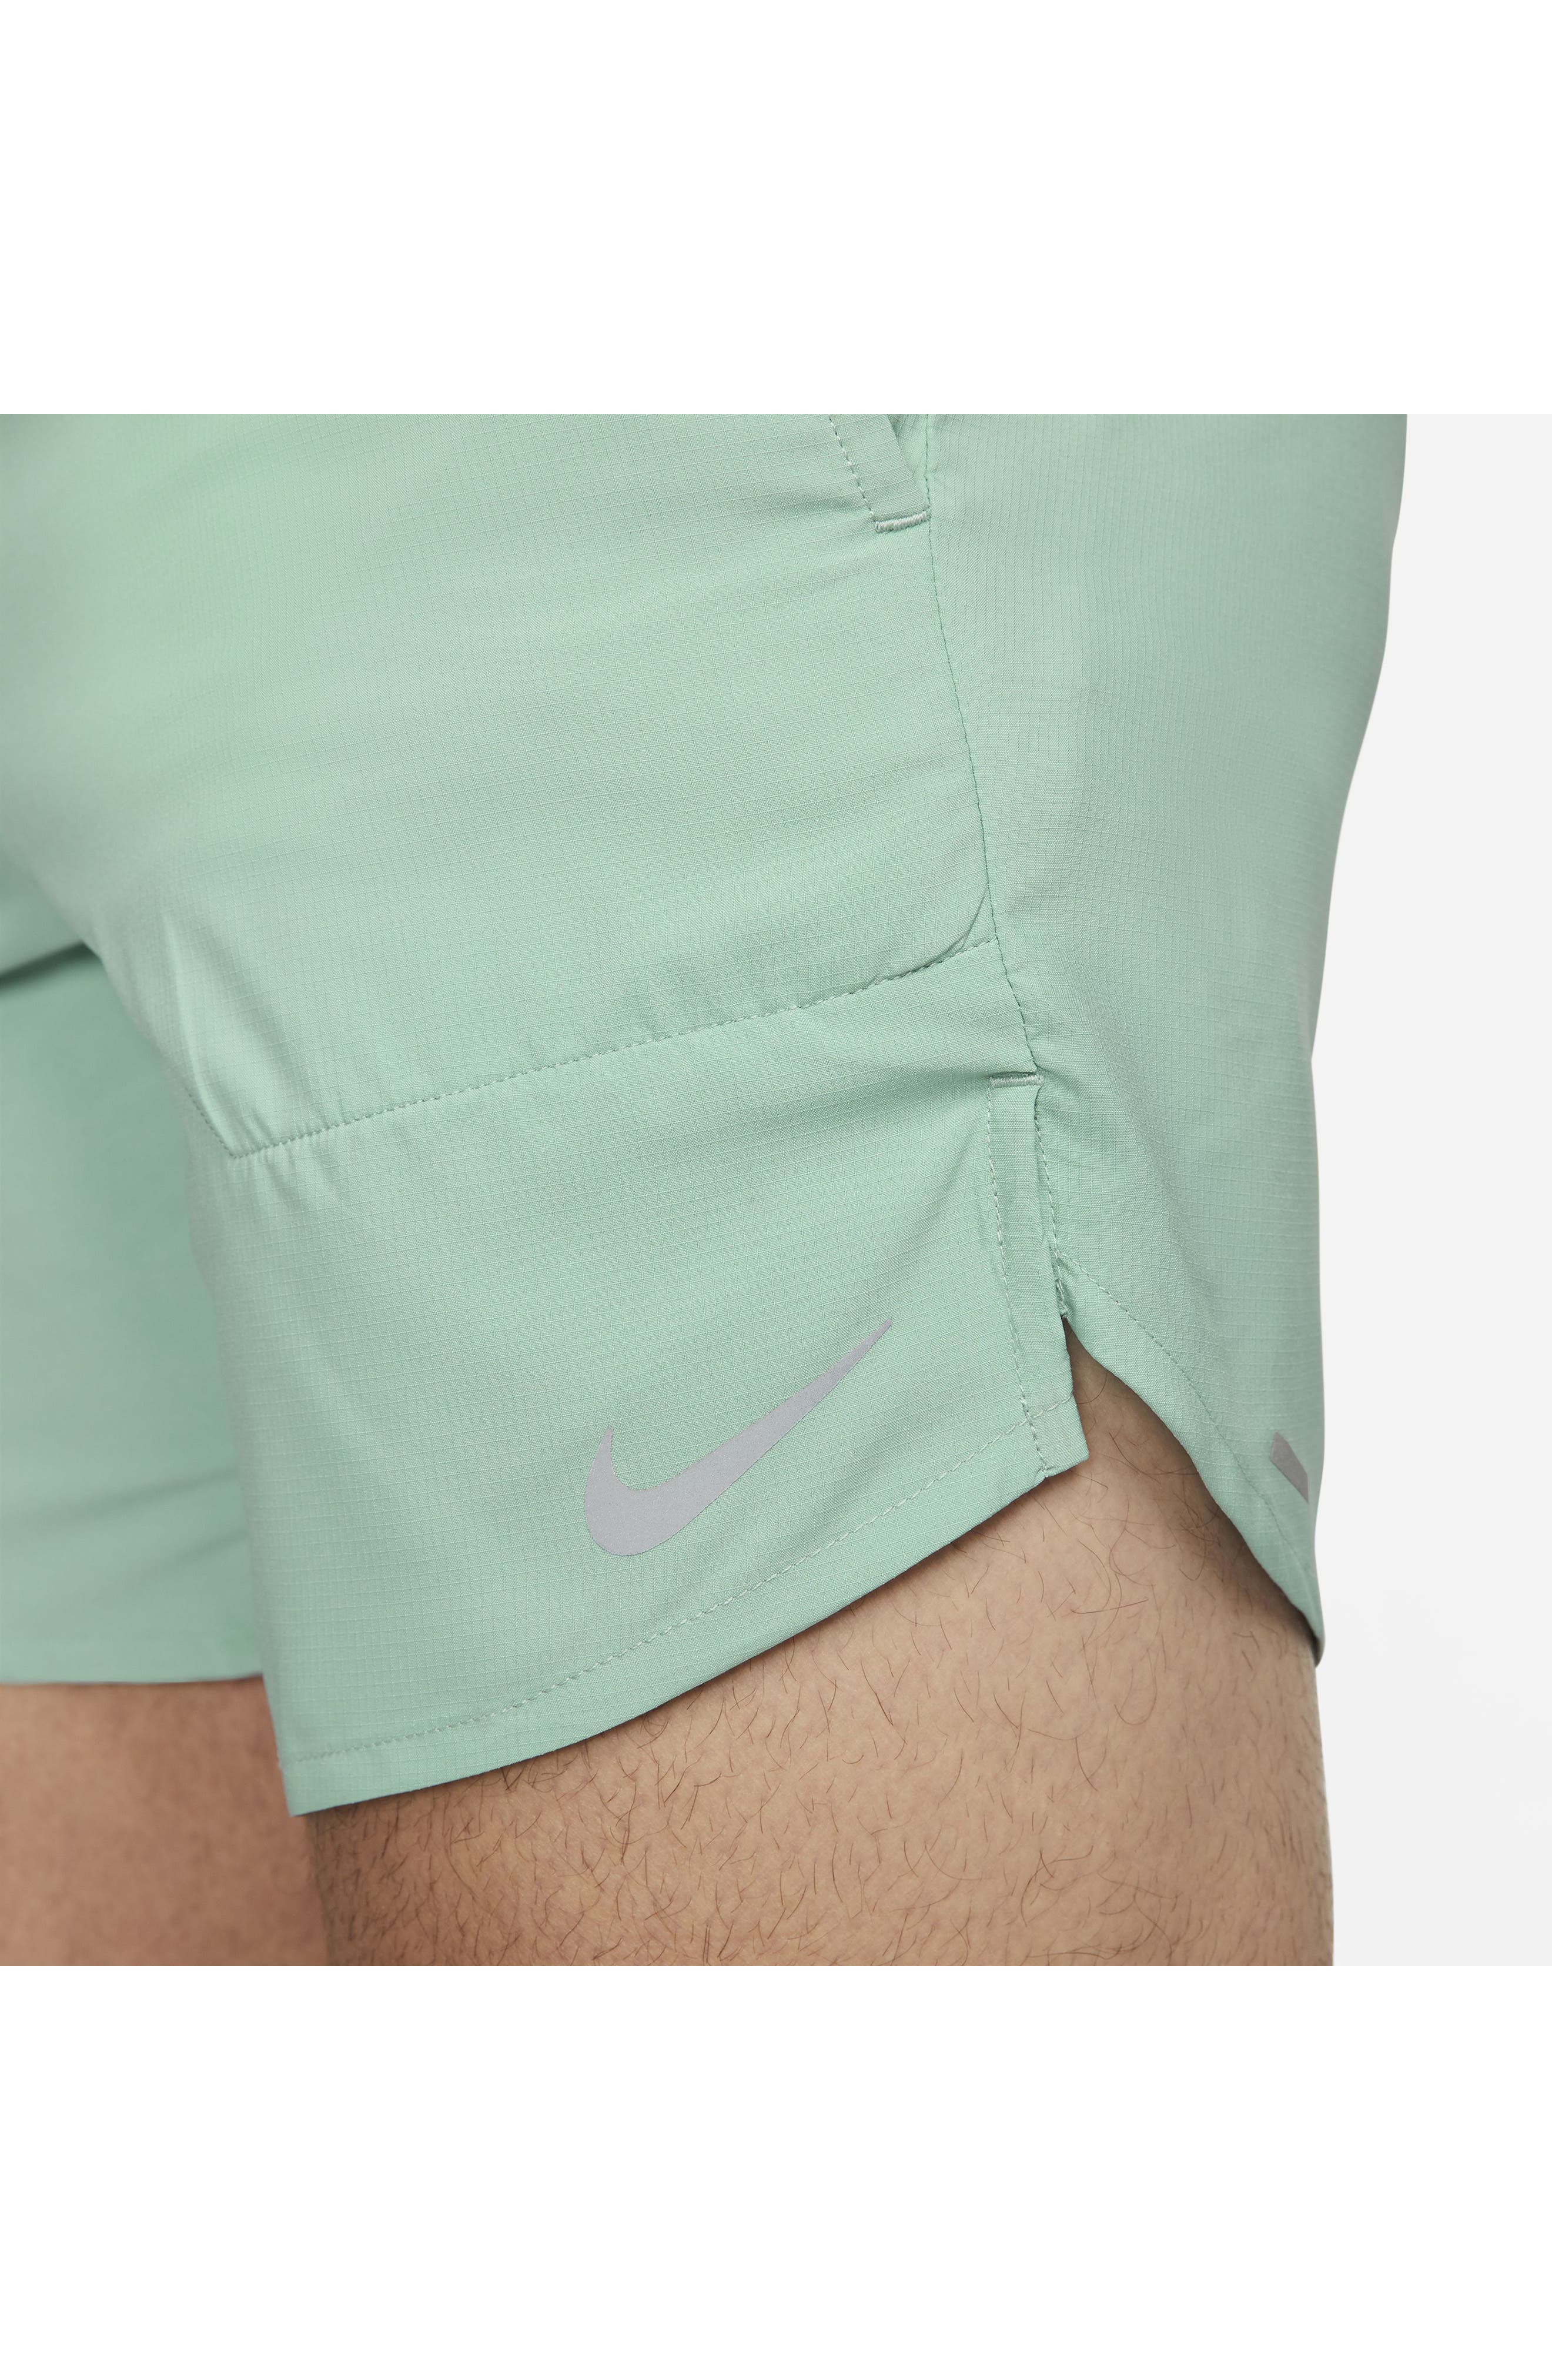 Nike Dri-FIT Stride 7-Inch Brief-Lined Running Shorts